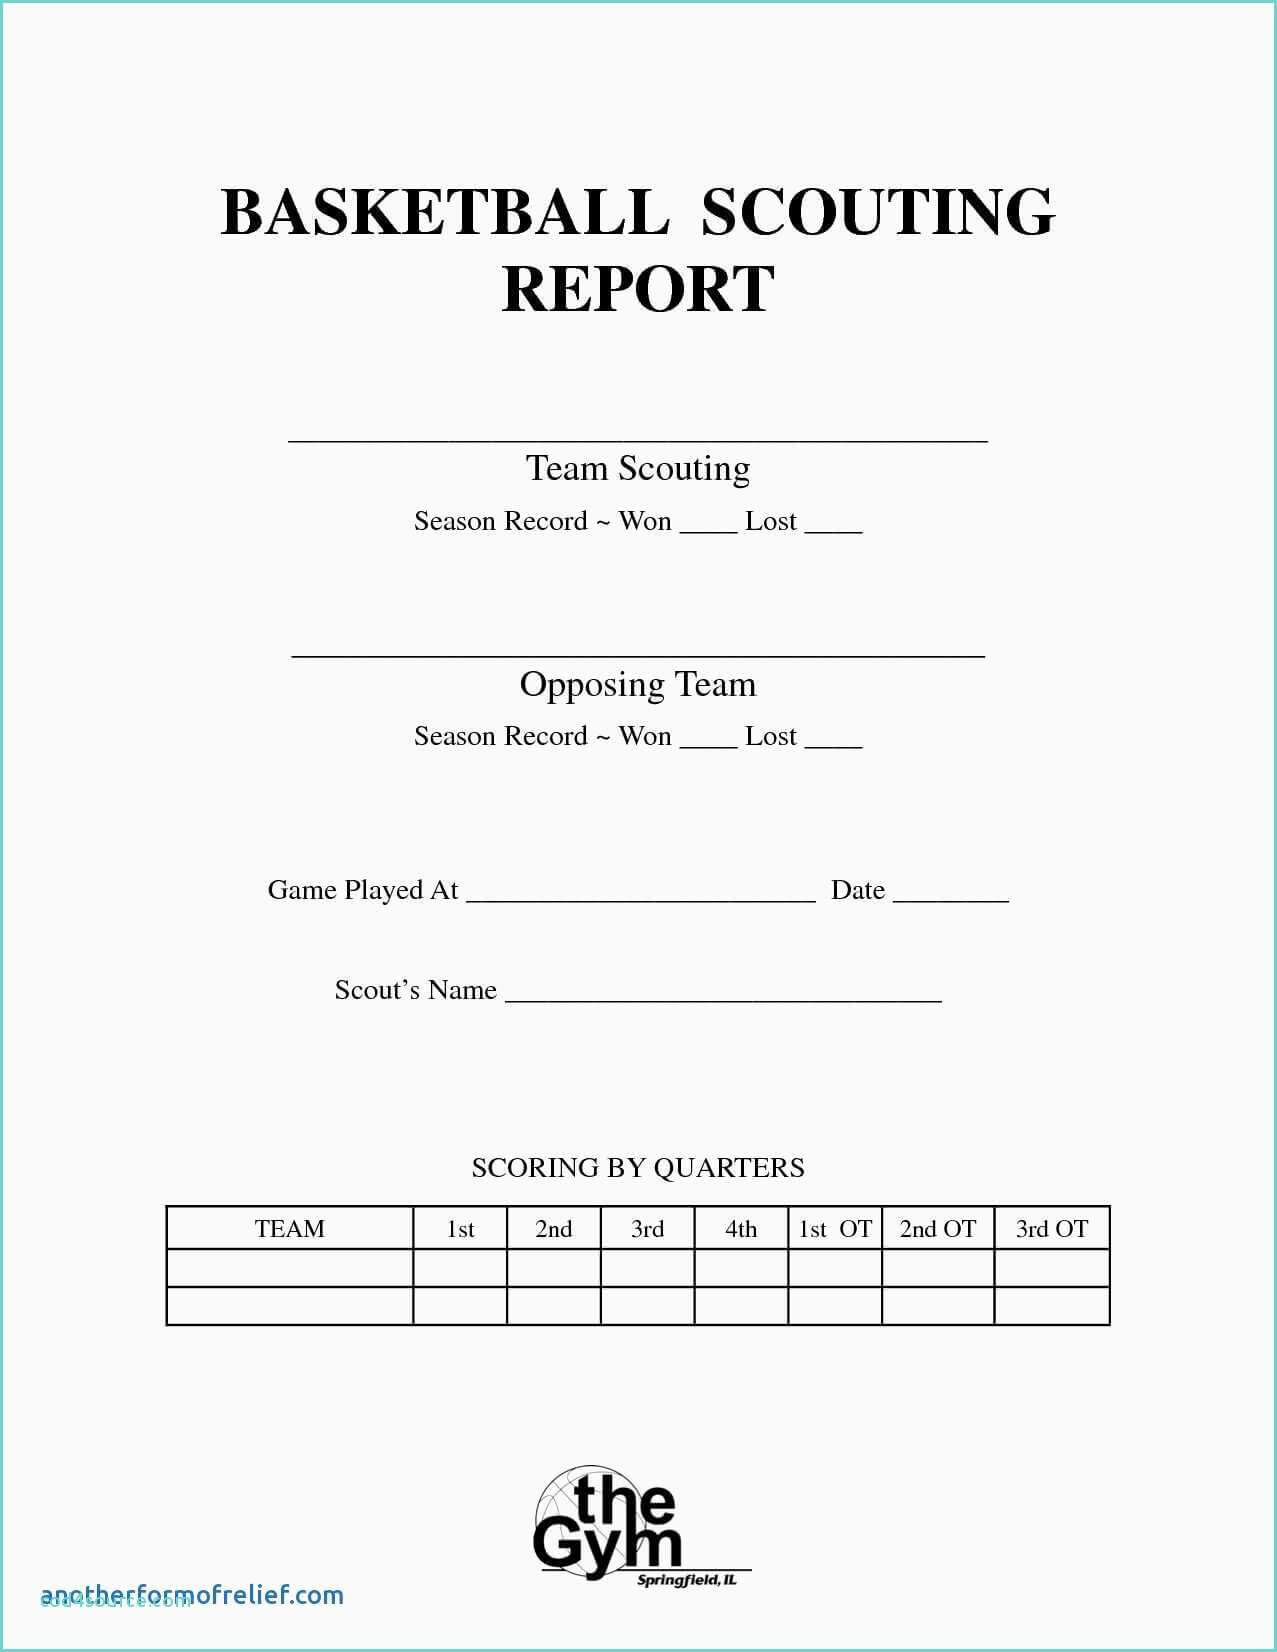 Report Examples College Basketball Scouting Template Team Throughout Basketball Scouting Report Template